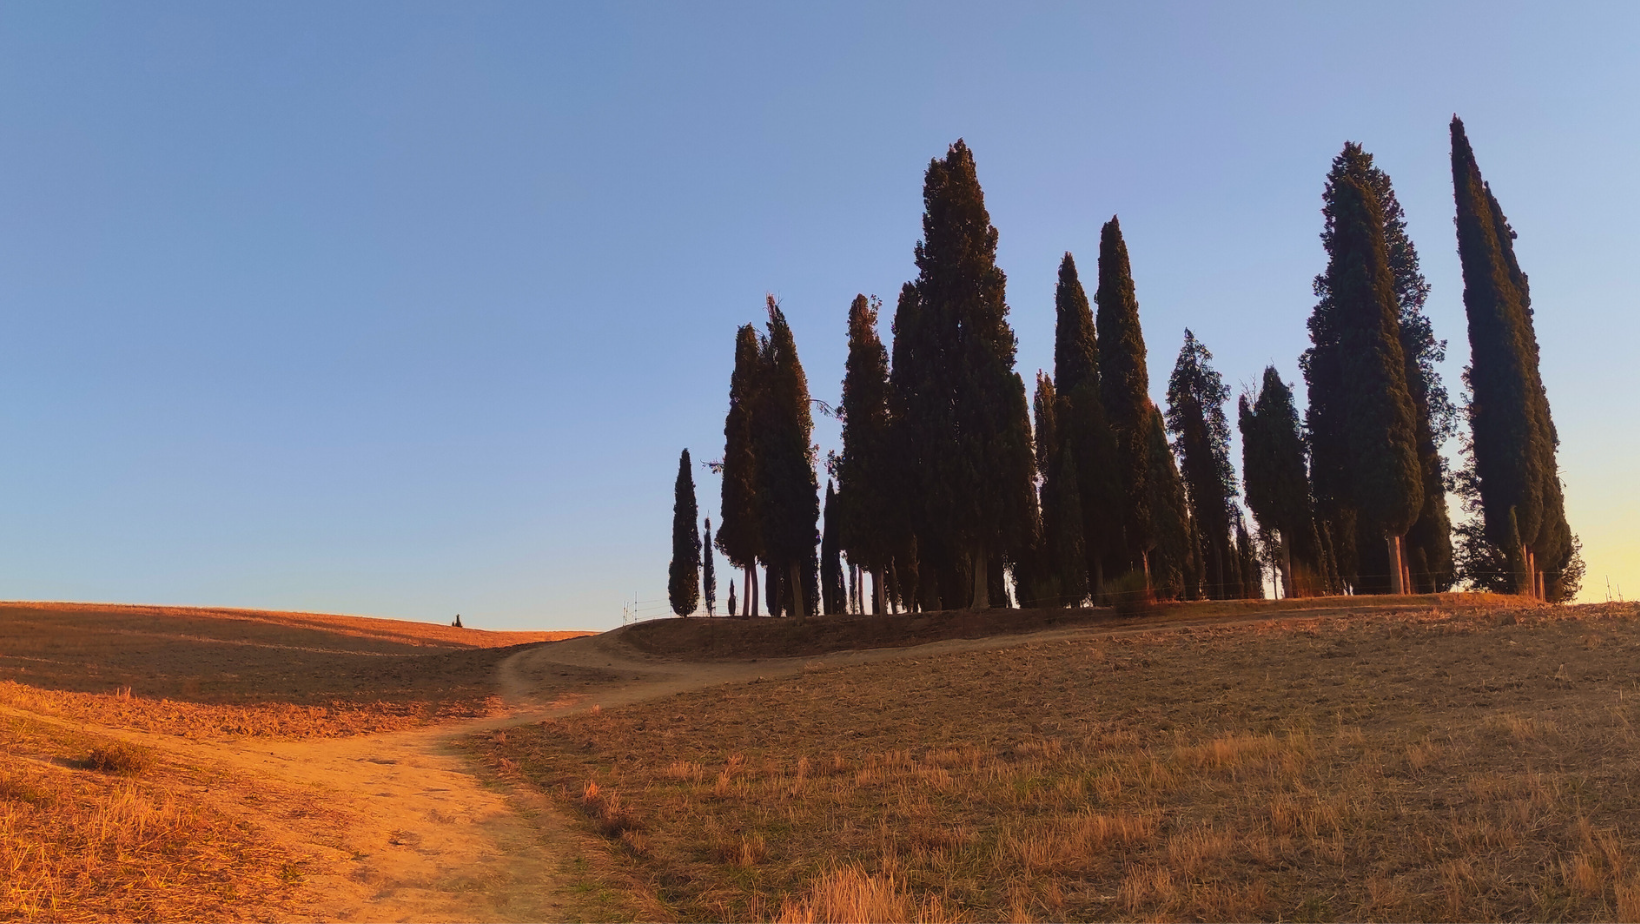 Hiking in Pienza on the footsteps of 